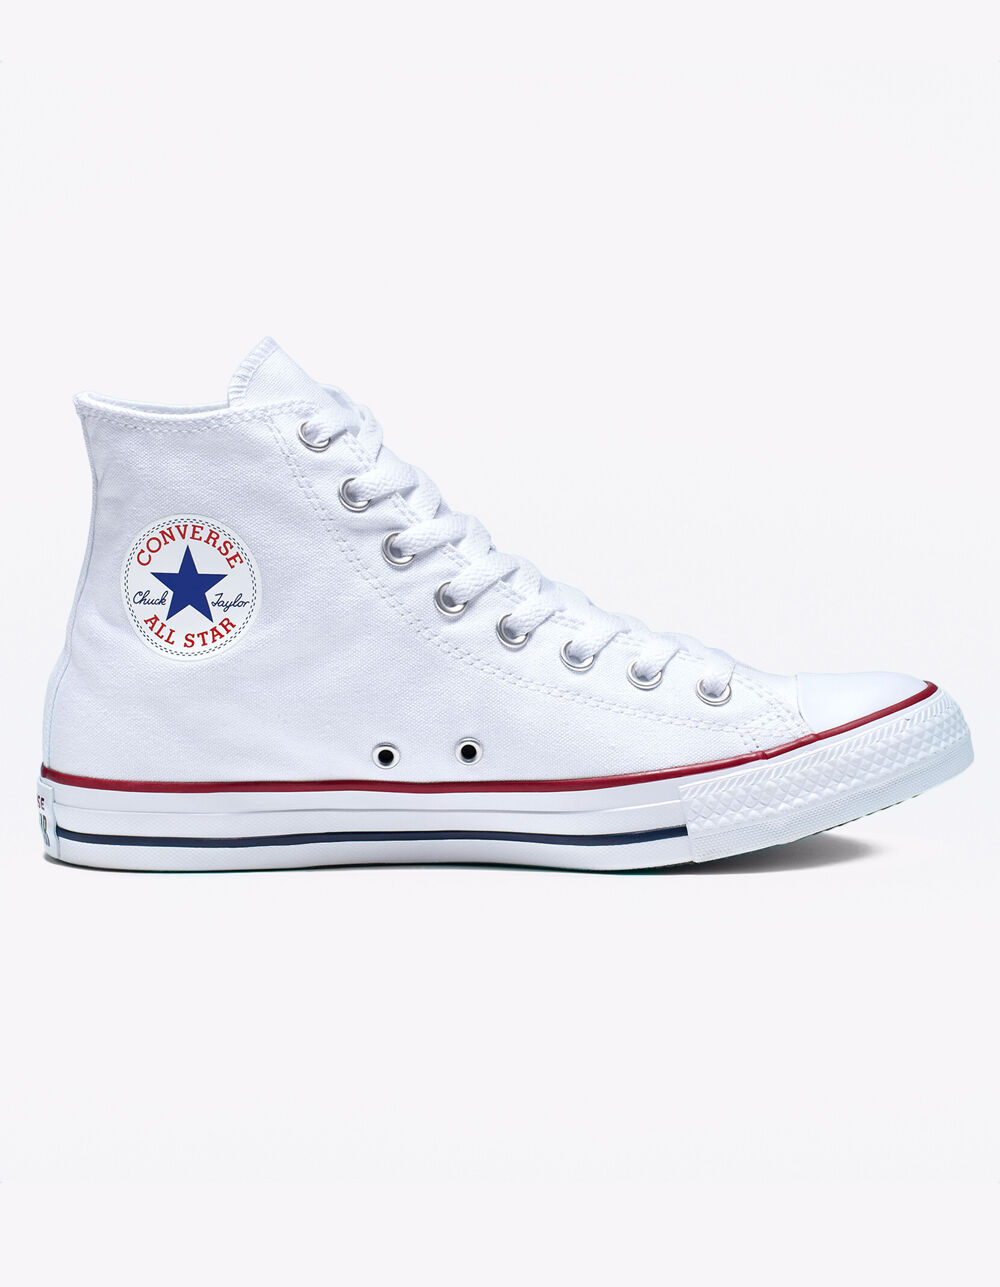 Prestige flise maksimere CONVERSE Chuck Taylor All Star White High Top Shoes - WHITE | Tillys